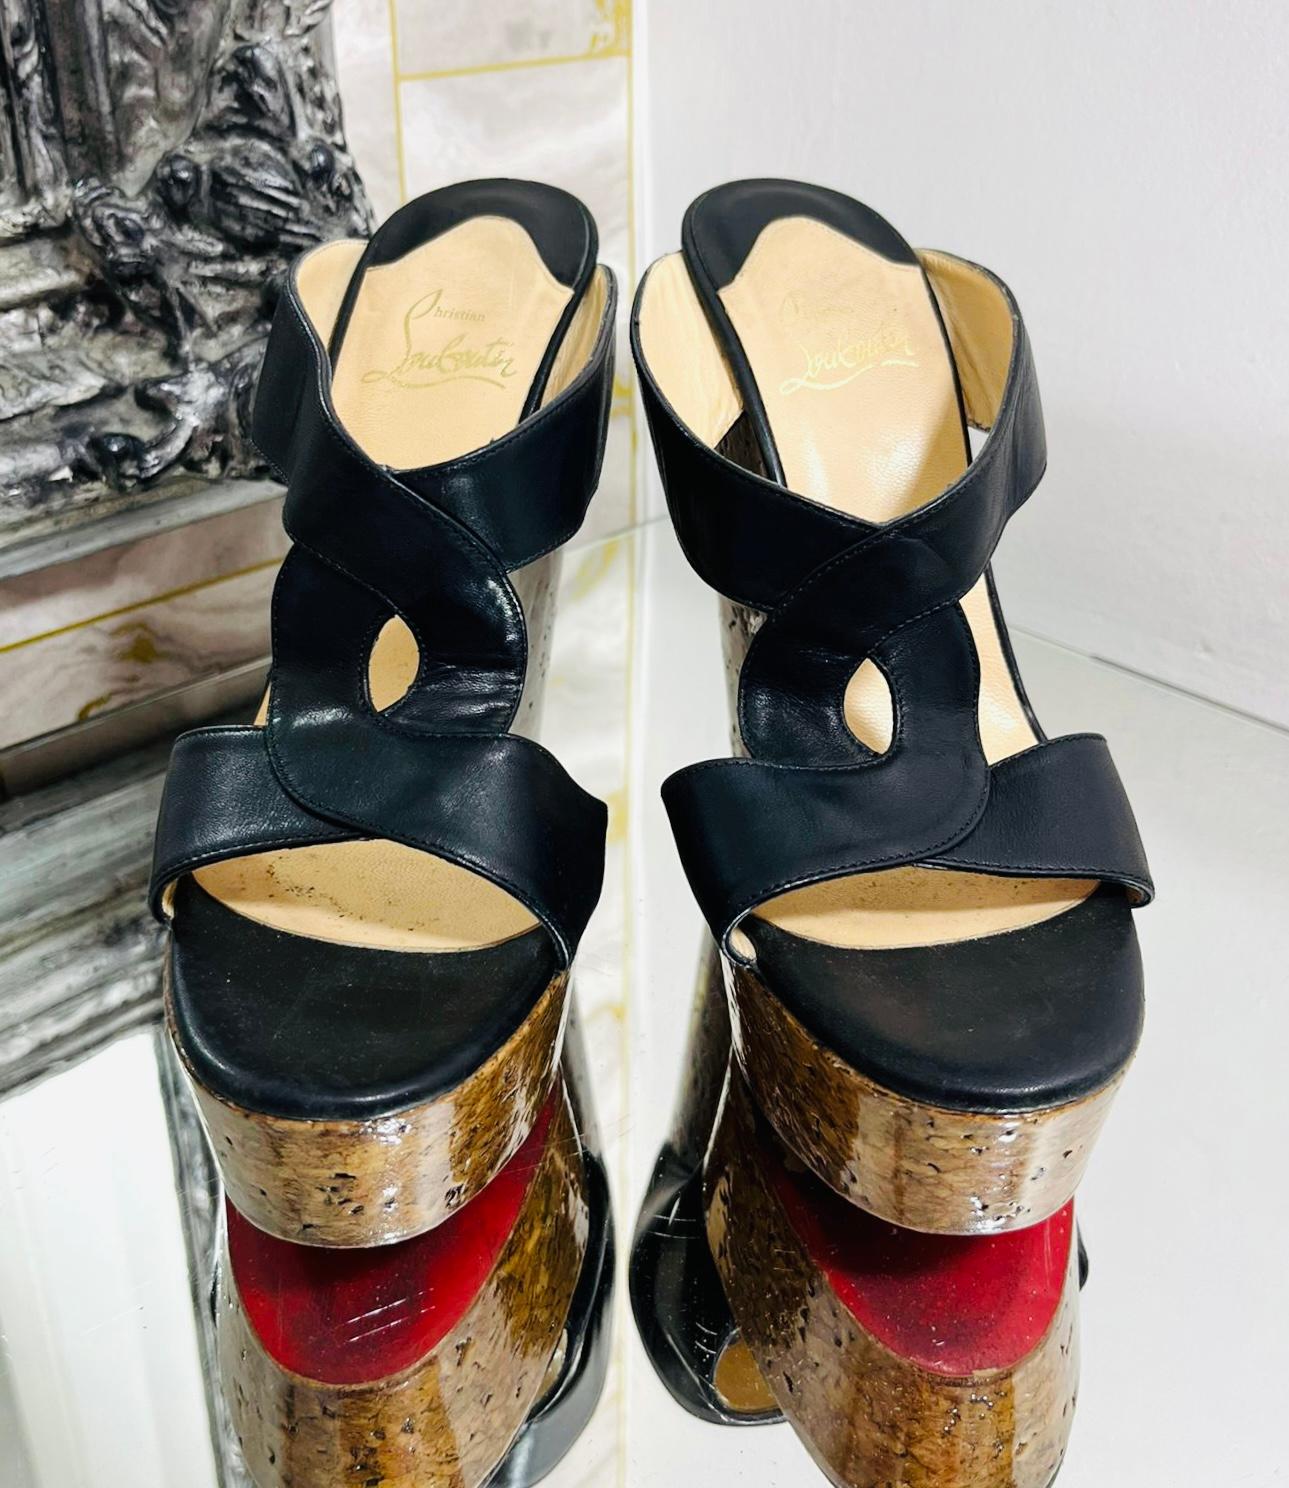 Christian Louboutin Leather & Cork Wedge Sandals

Black wedges designed with wide, twisted straps and detailed with high cork platform.

Featuring iconic red soles and leather lining.

Size – 38

Condition – Good (General signs of wear, scratches to